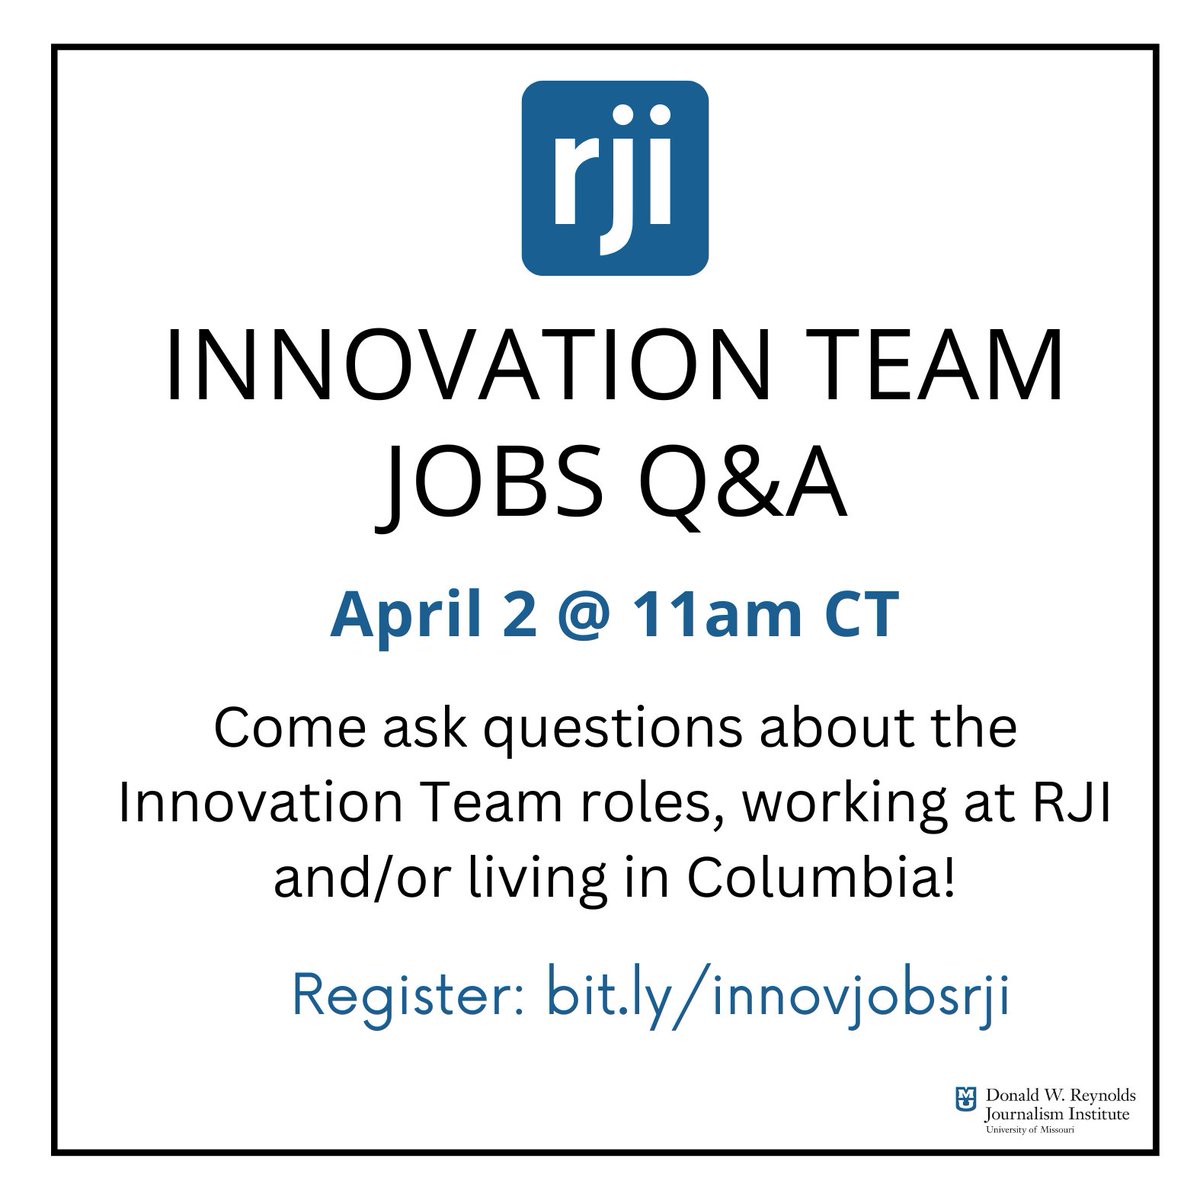 Join us TOMORROW at 11am CT. Come ask all the questions, and hear about the two roles we're hiring for! bit.ly/innovjobsrji